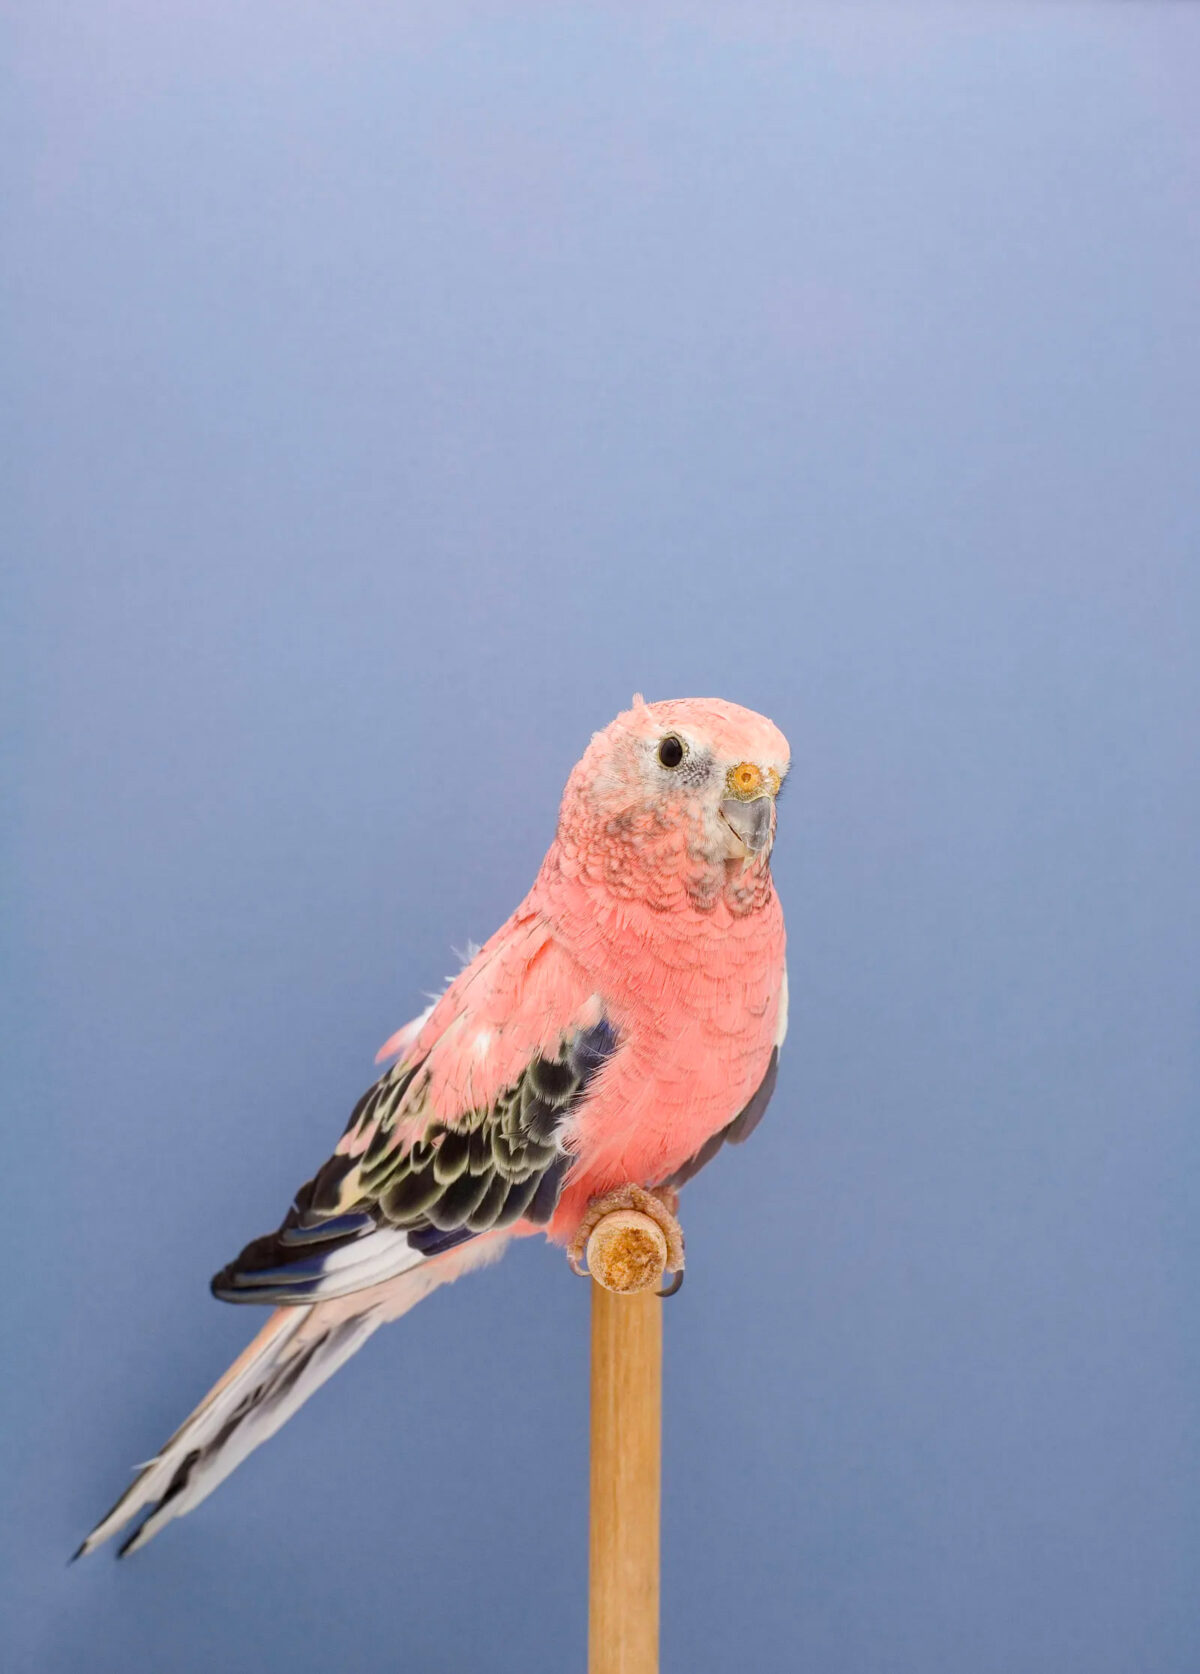 An Incomplete Dictionary Of Show Birds A Minimalist Bird Photography Series By Luke Stephenson (2)